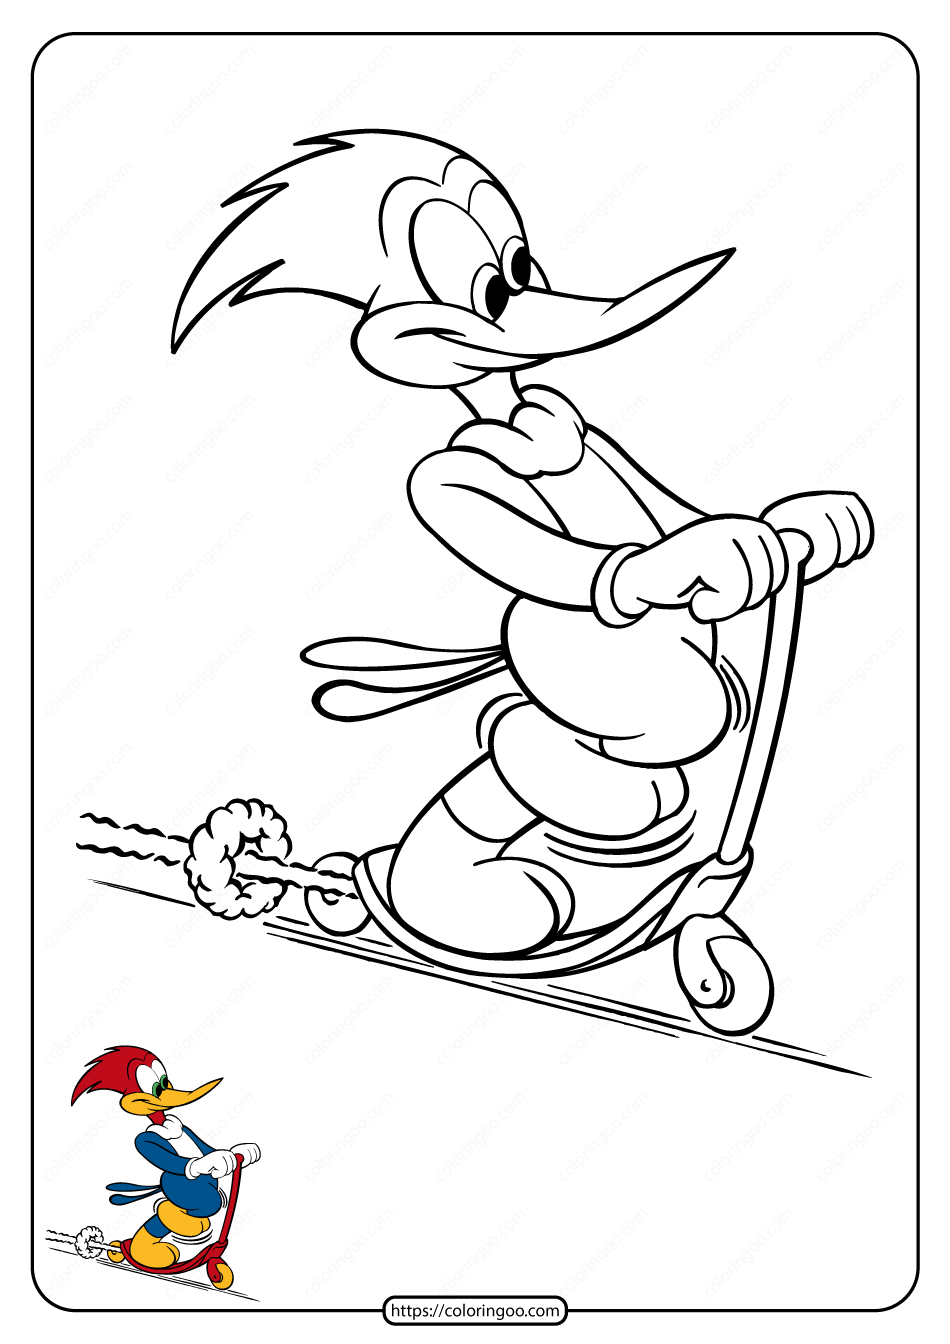 Woody Woodpecker Riding Scooter Coloring Page